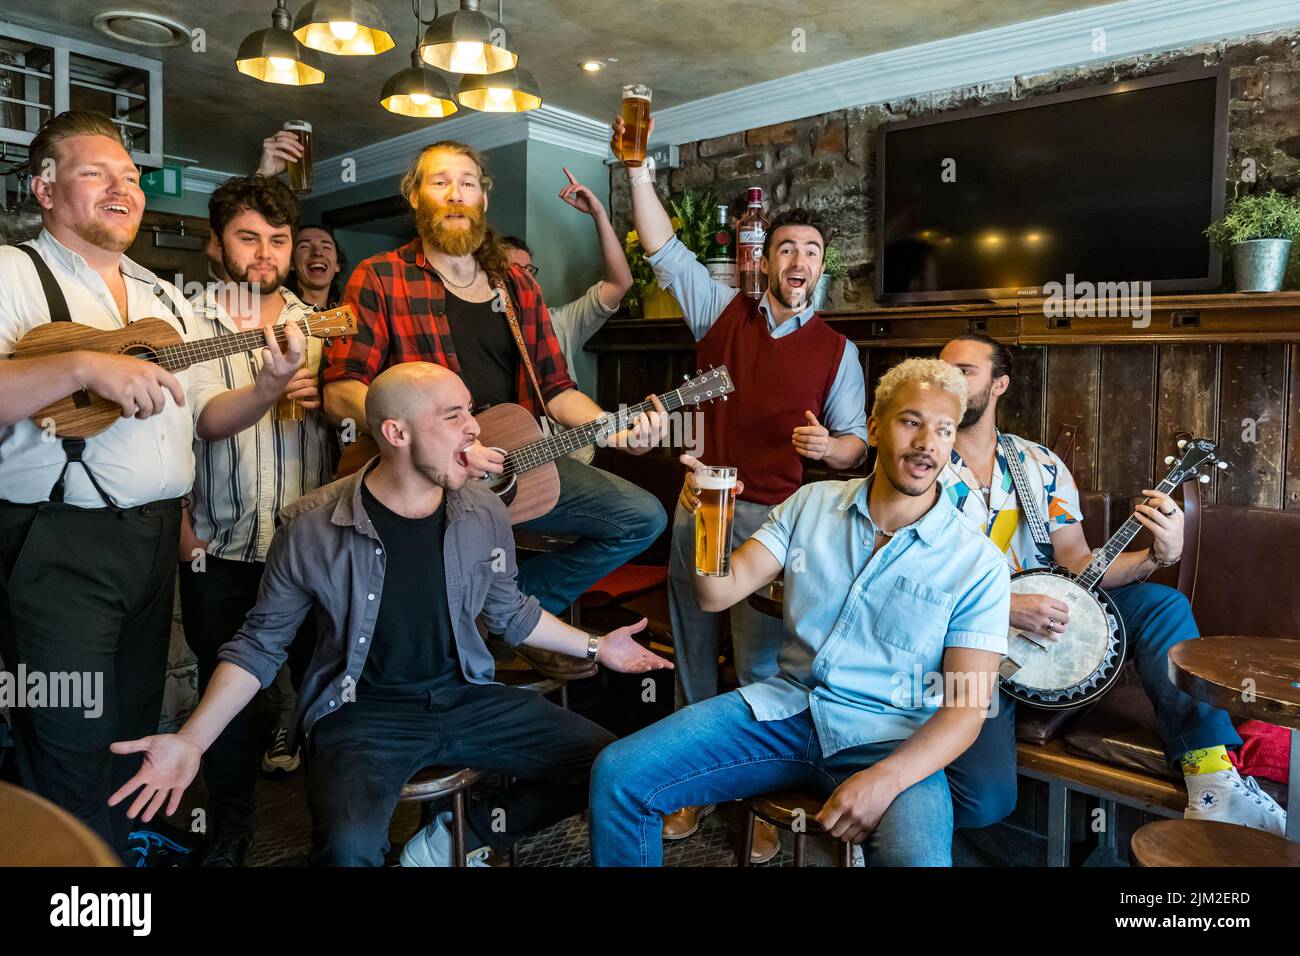 Edinburgh, Scotland, United Kingdom, 4th August 2022. Edinburgh Festival Fringe: The Chior of Man all male singong grup appearing at the Fringe this month enjoy a pint and a sing song at the Smallest Pub in Scotland in the Grassmarket before their appearance later today. Credit: Sally Anderson/Alamy Live News Stock Photo